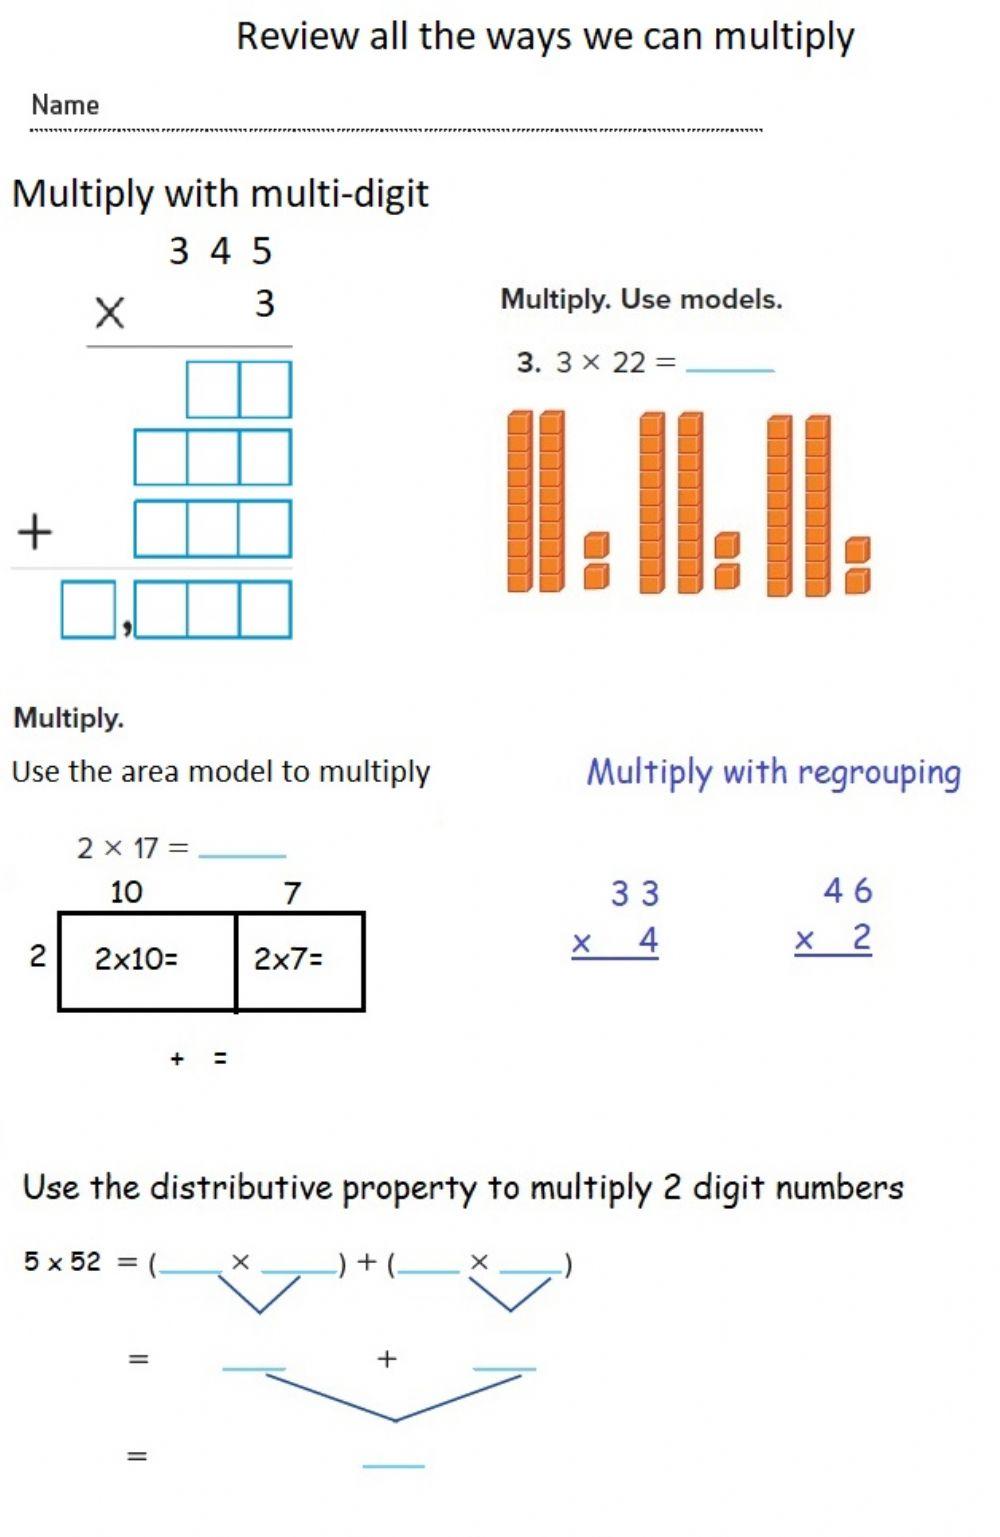 Review the different ways we can multiply numbers